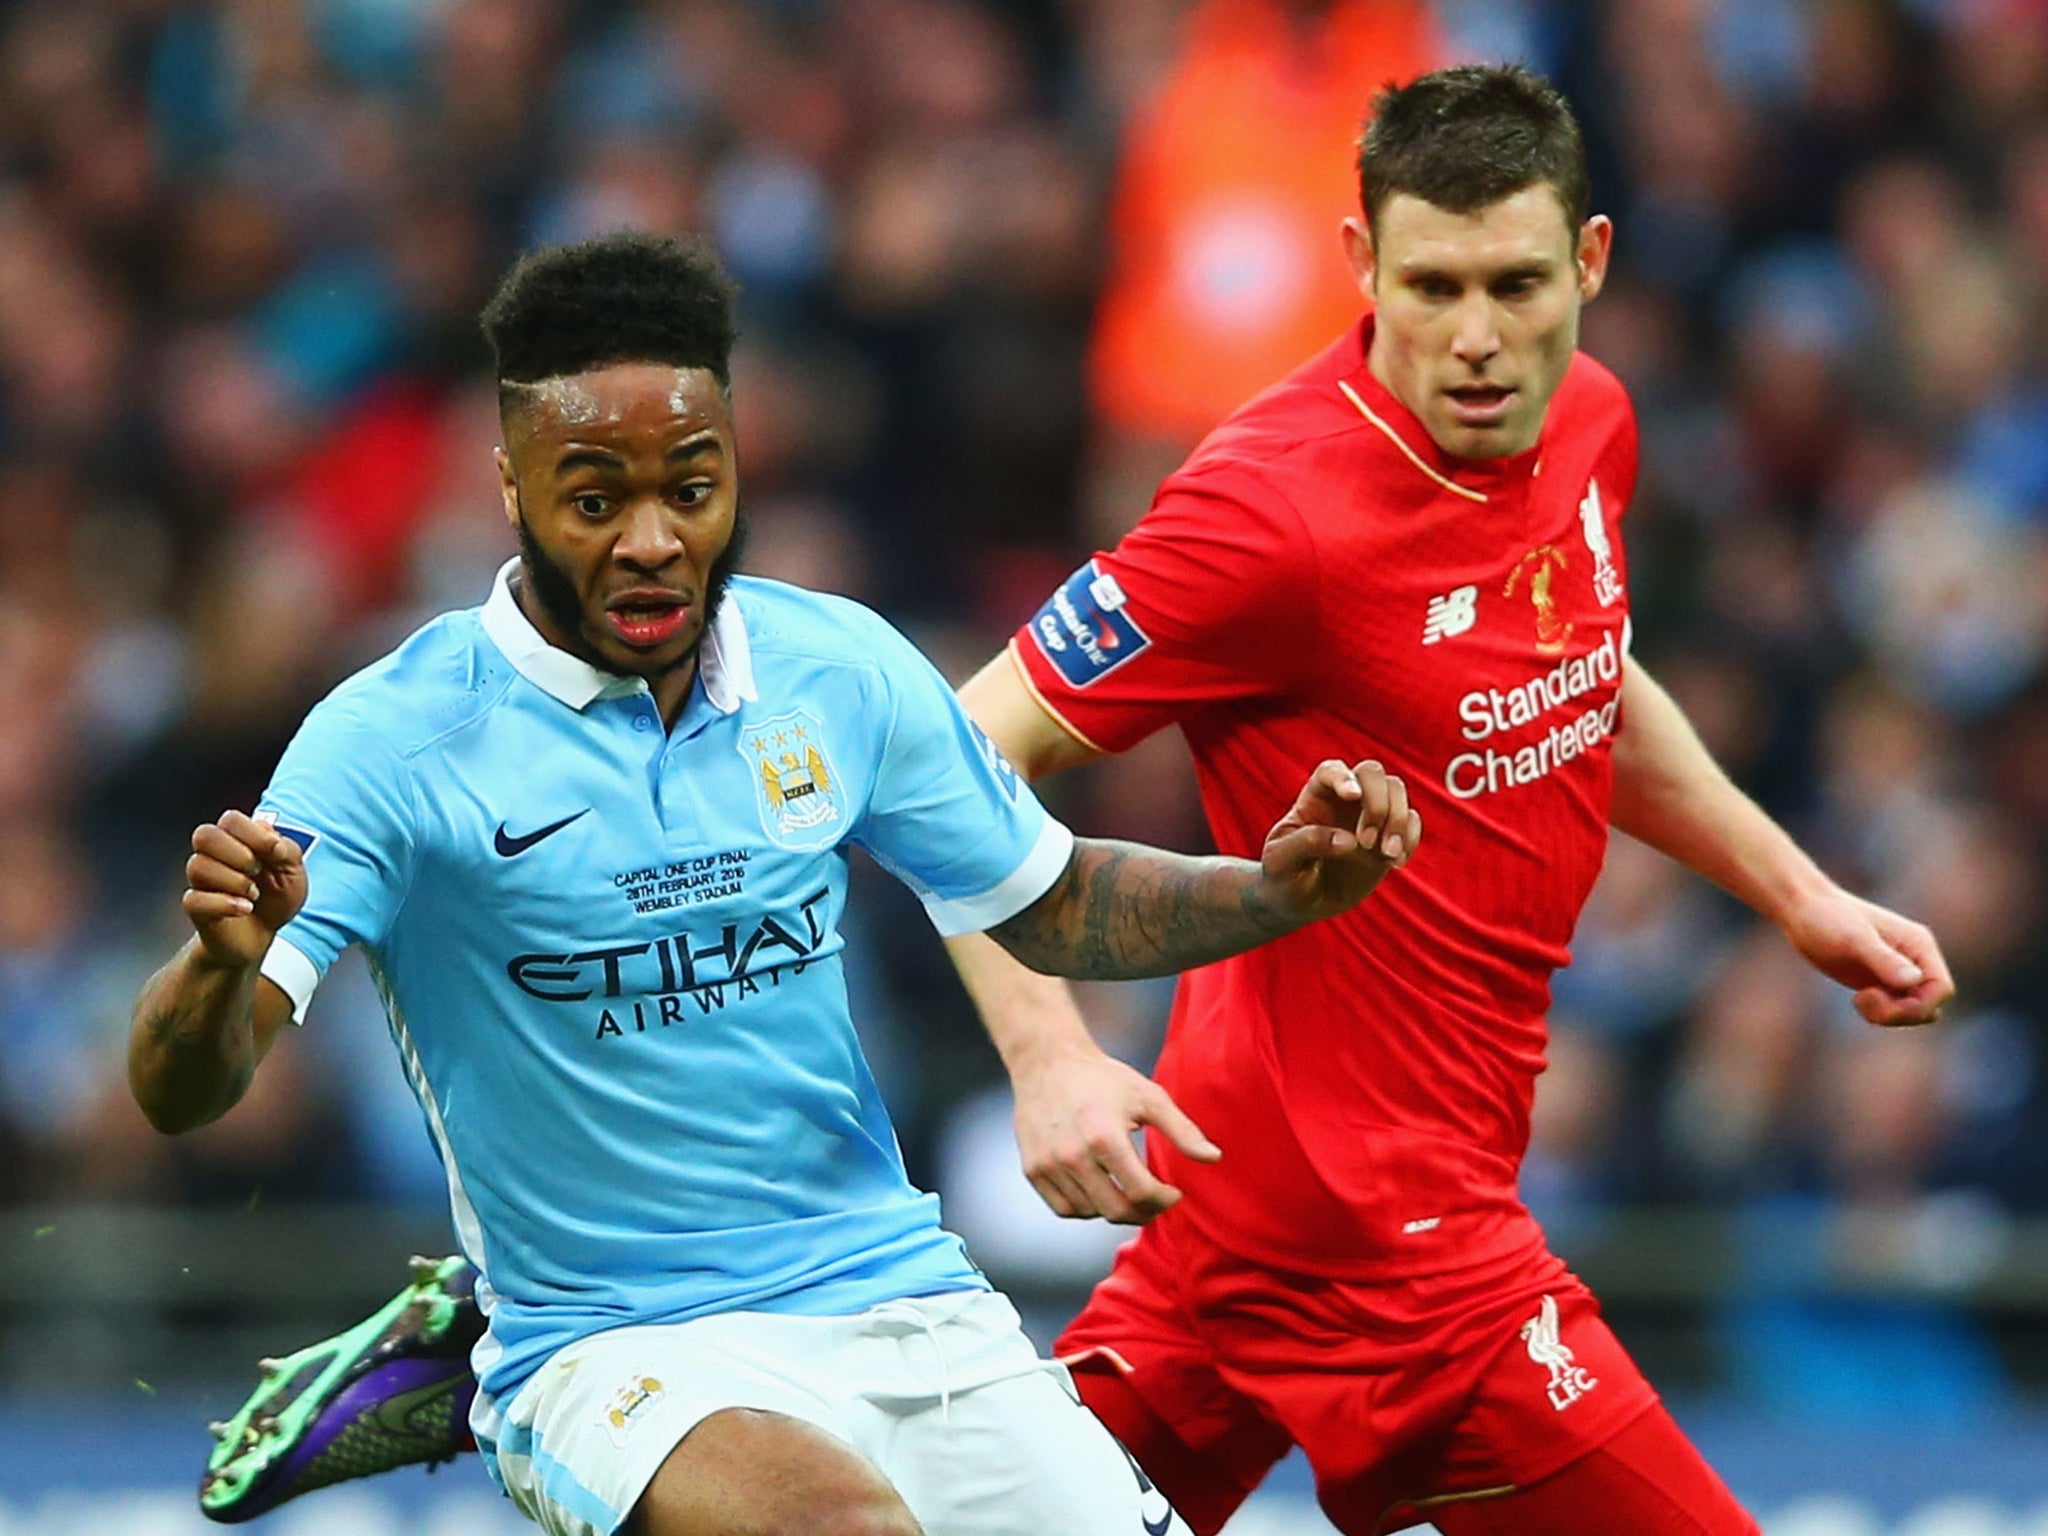 Raheem Sterling in action against Liverpool